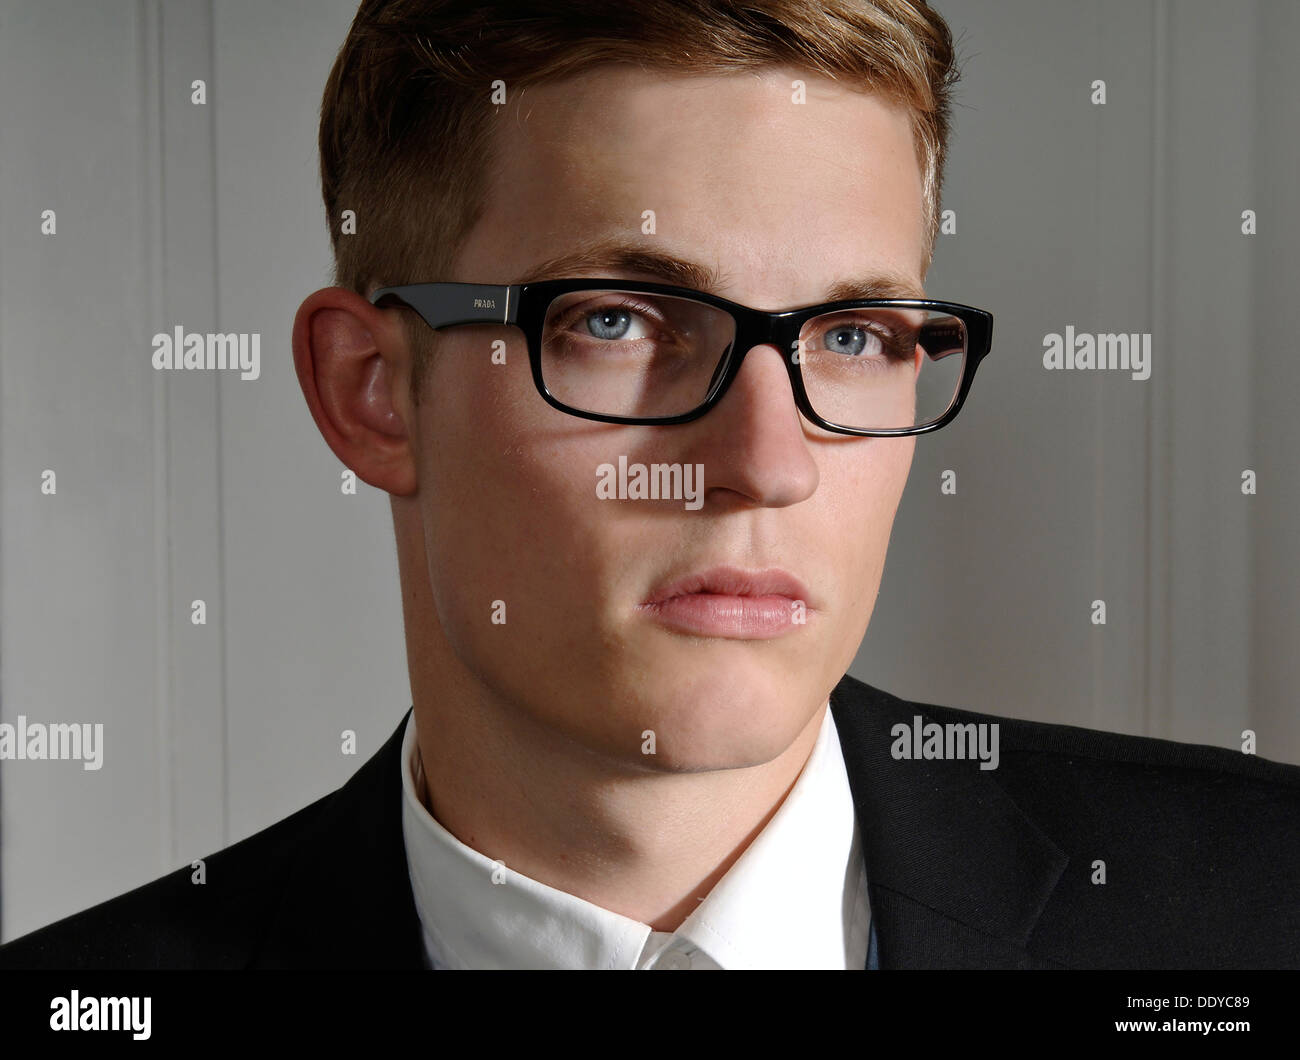 Young man wearing a suit and glasses, portrait Stock Photo - Alamy